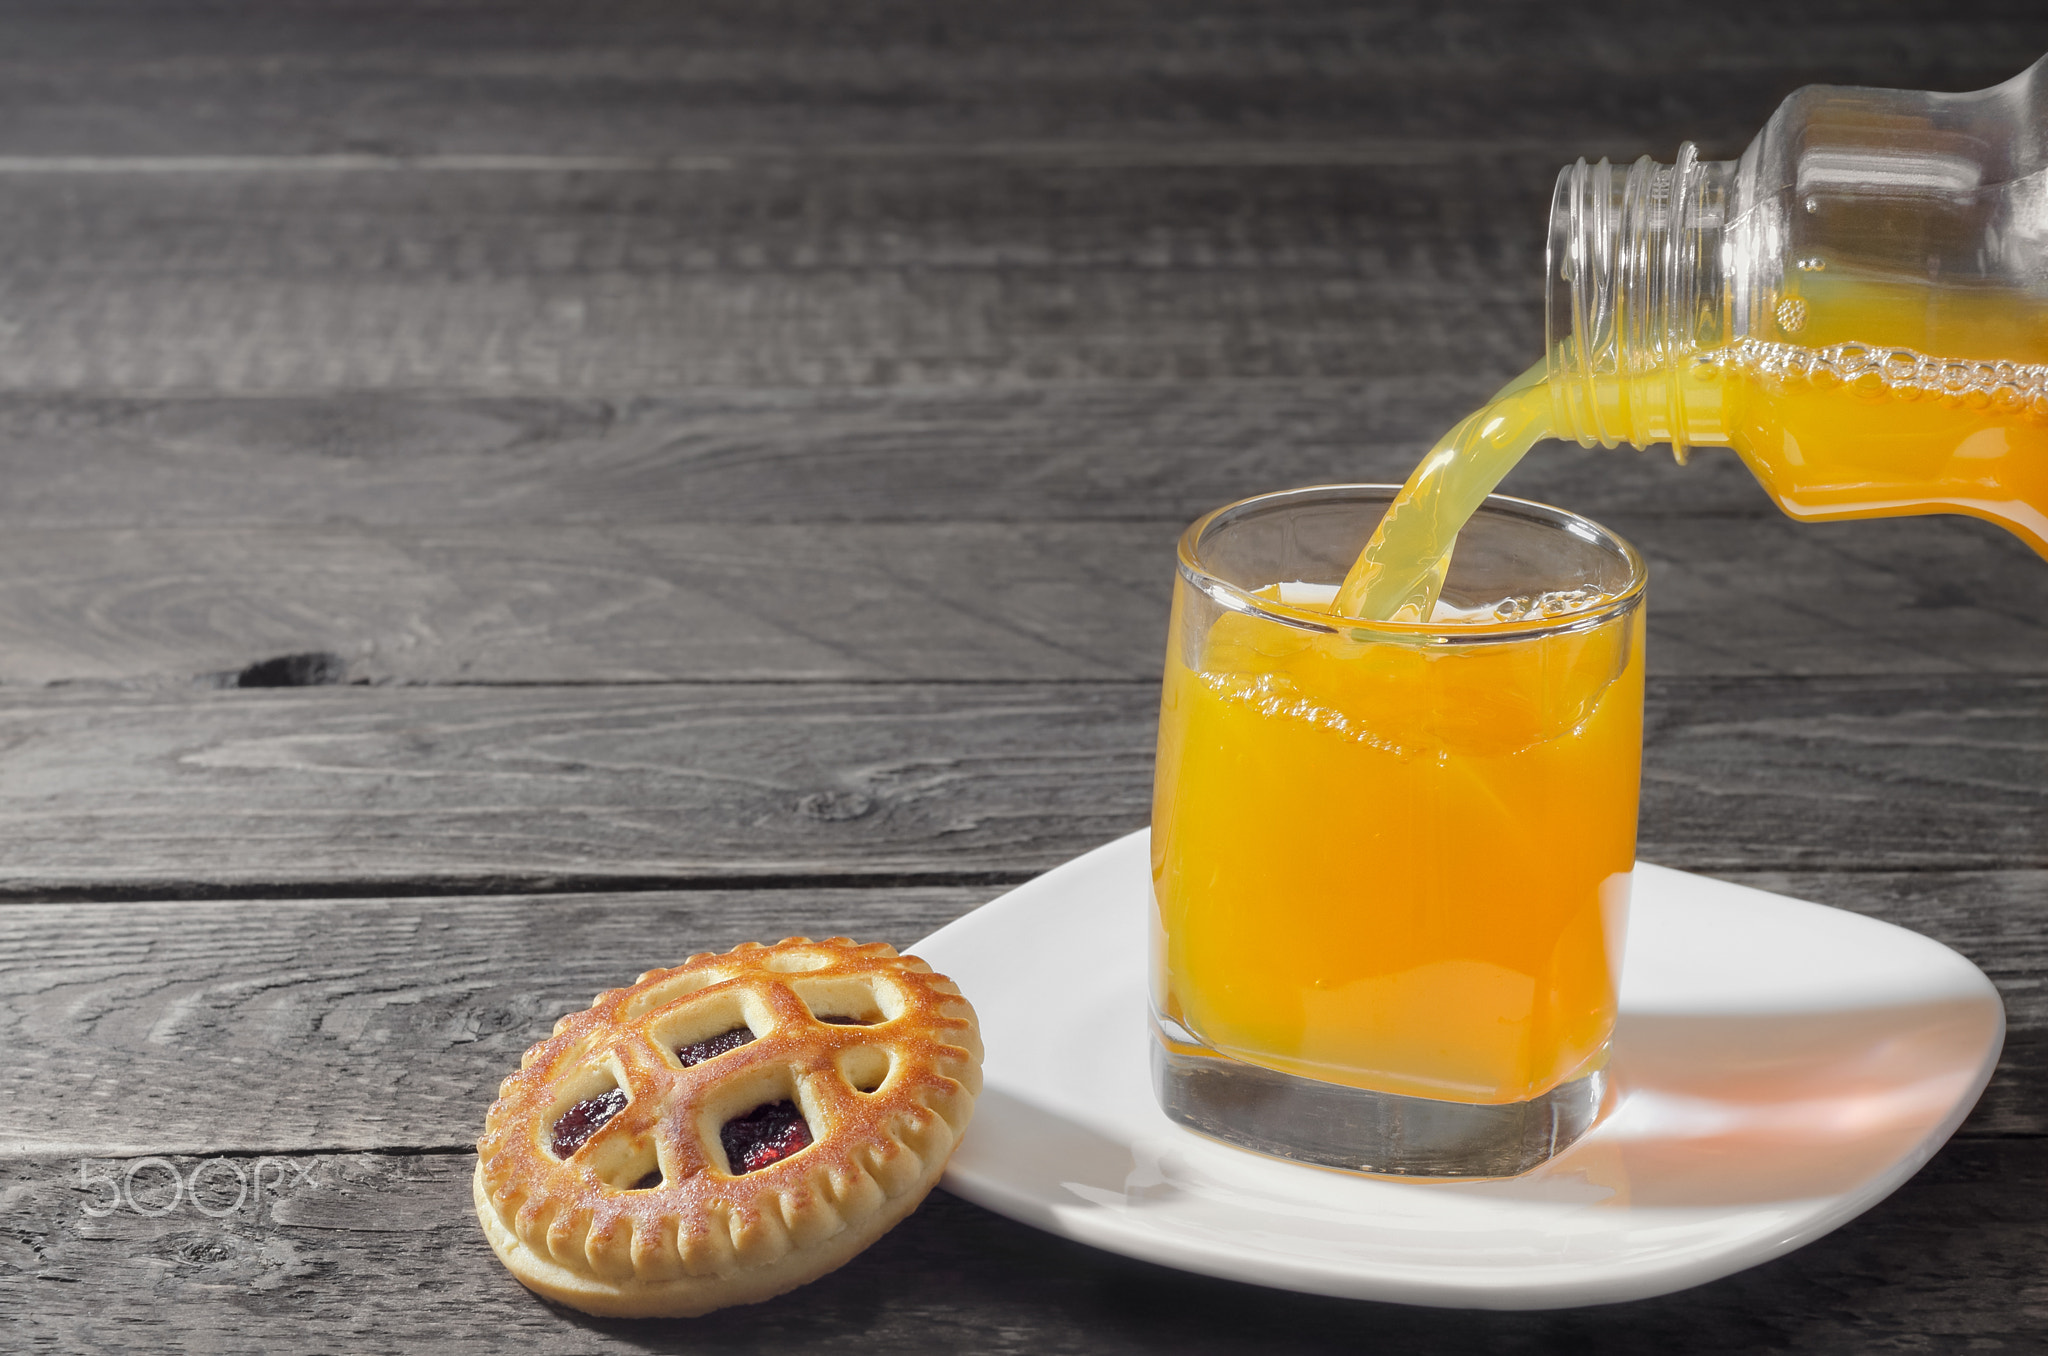 Cookies and juice is poured into a glass on gray background wood. Selective focus.